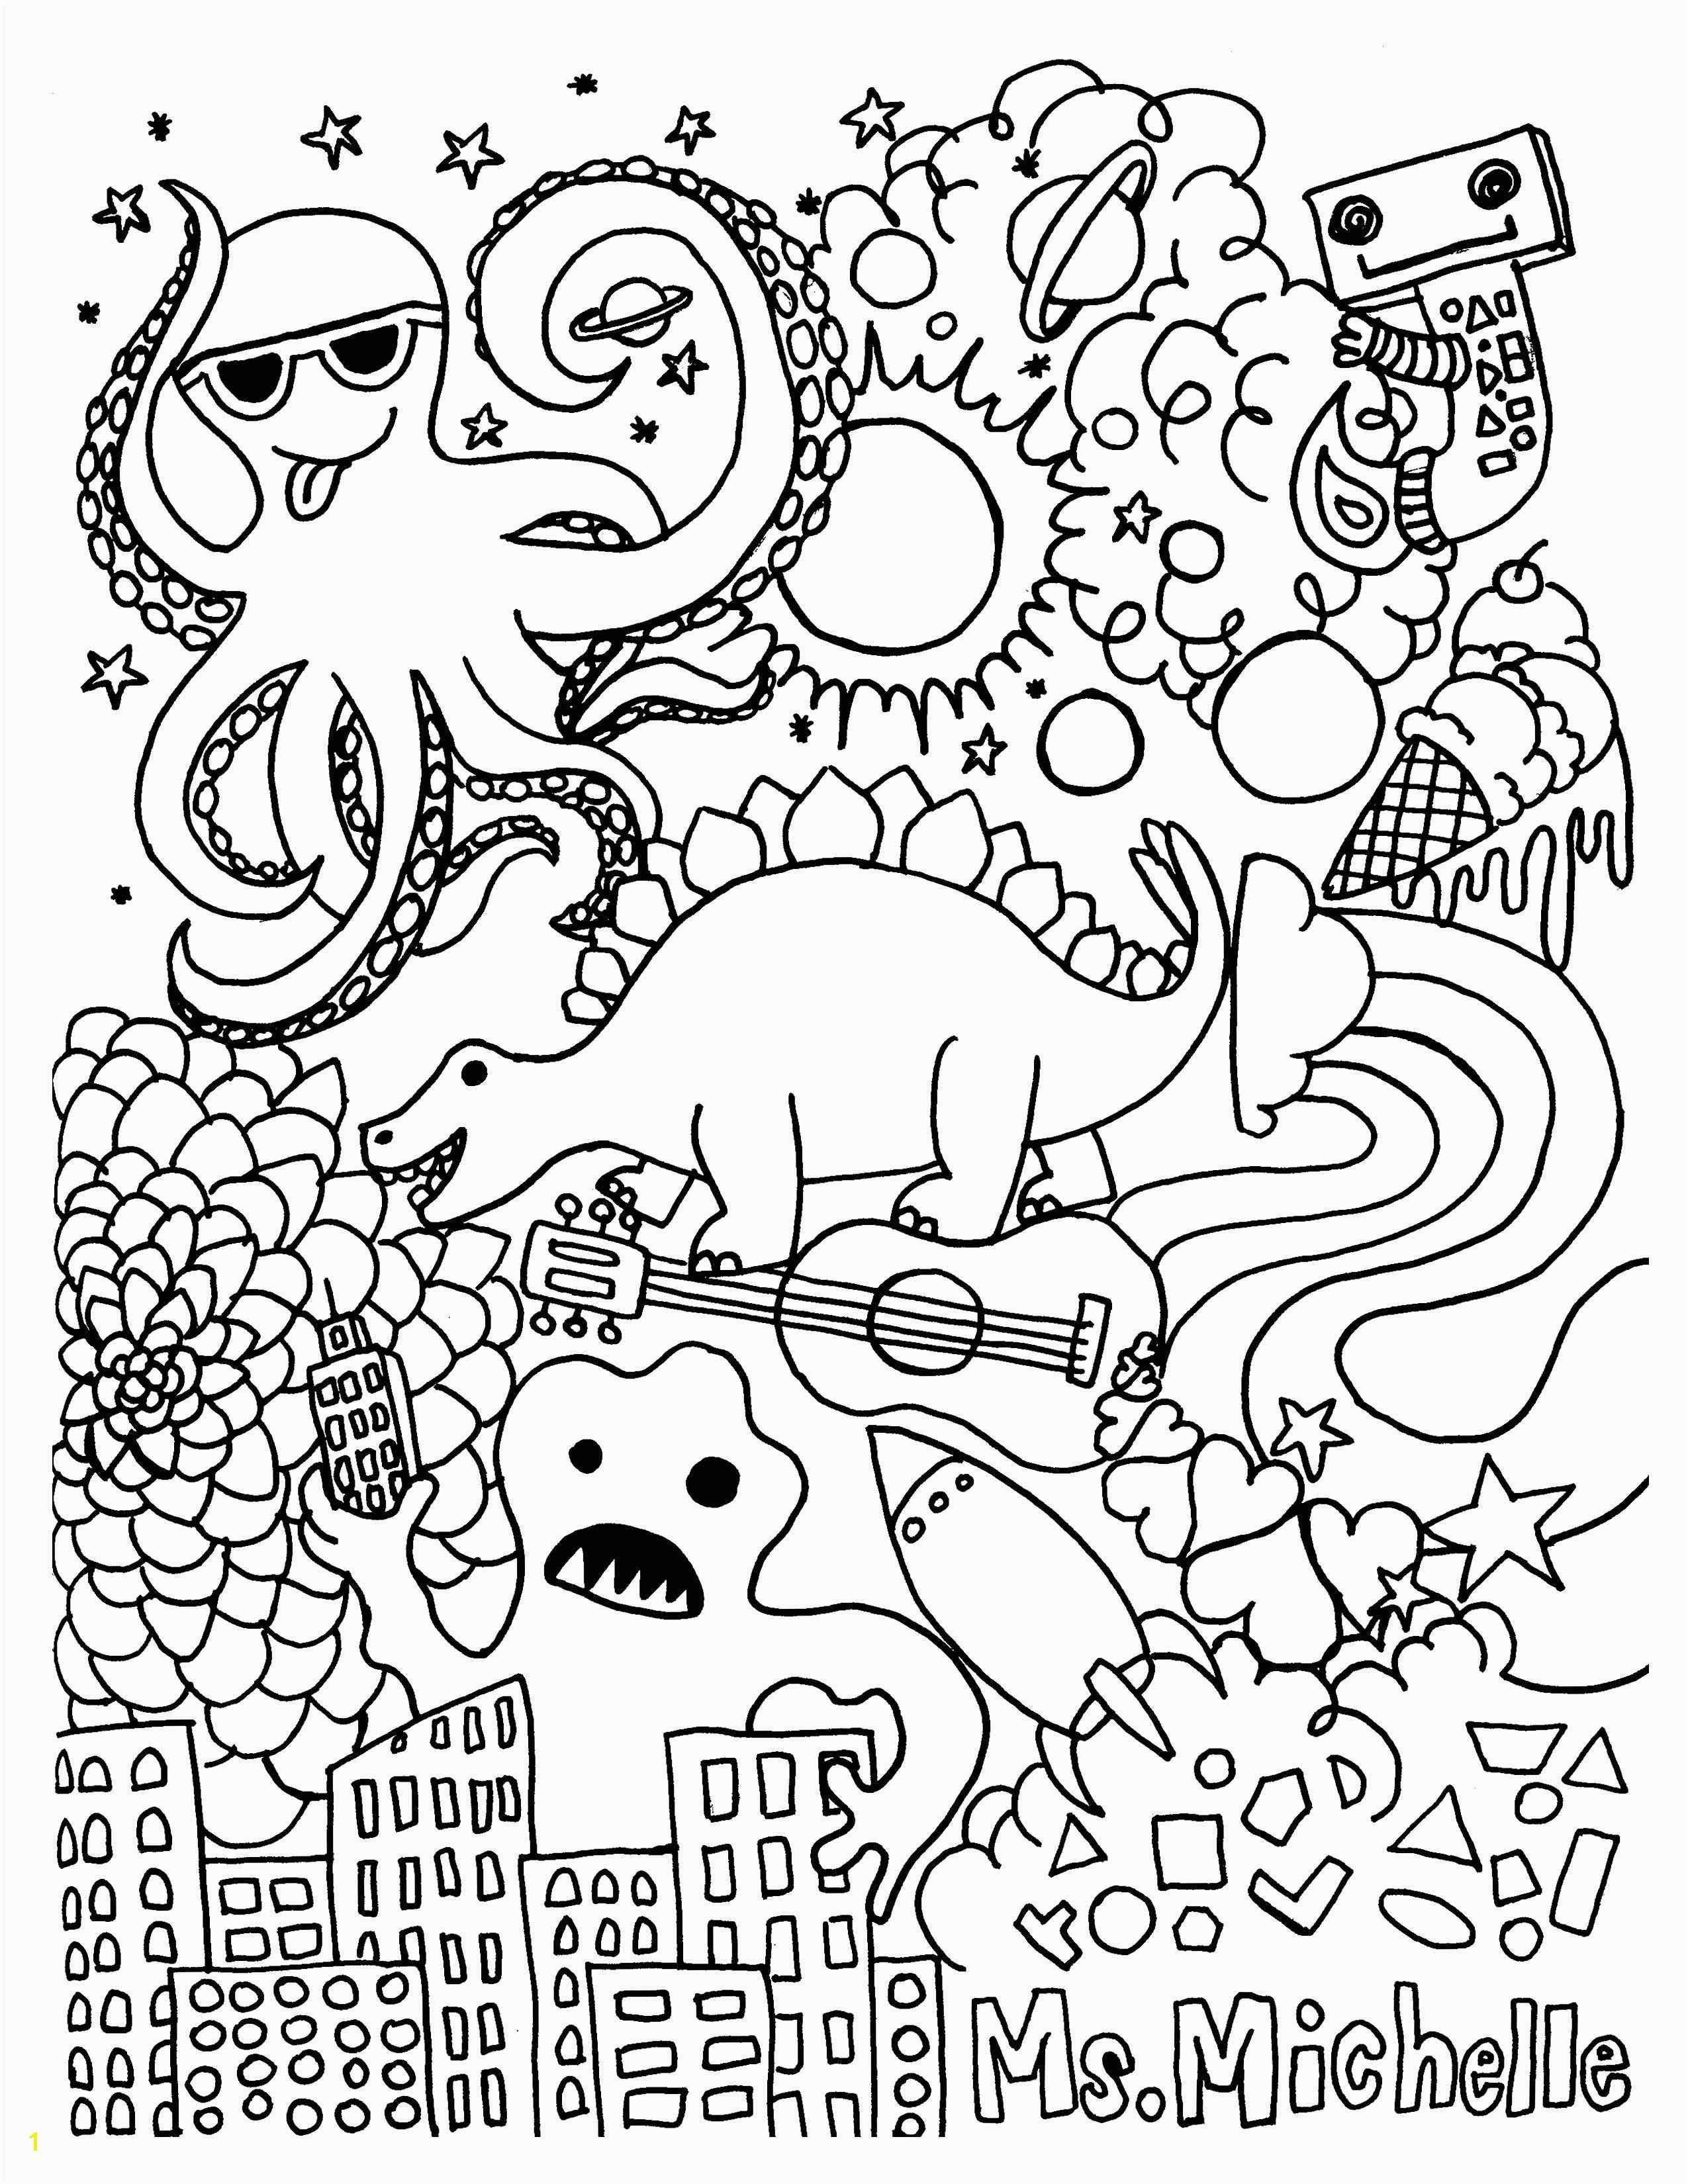 Autumn Coloring Pages Preschool 2019 Free Coloring Pages for Halloween Unique Best Coloring Page Adult Od